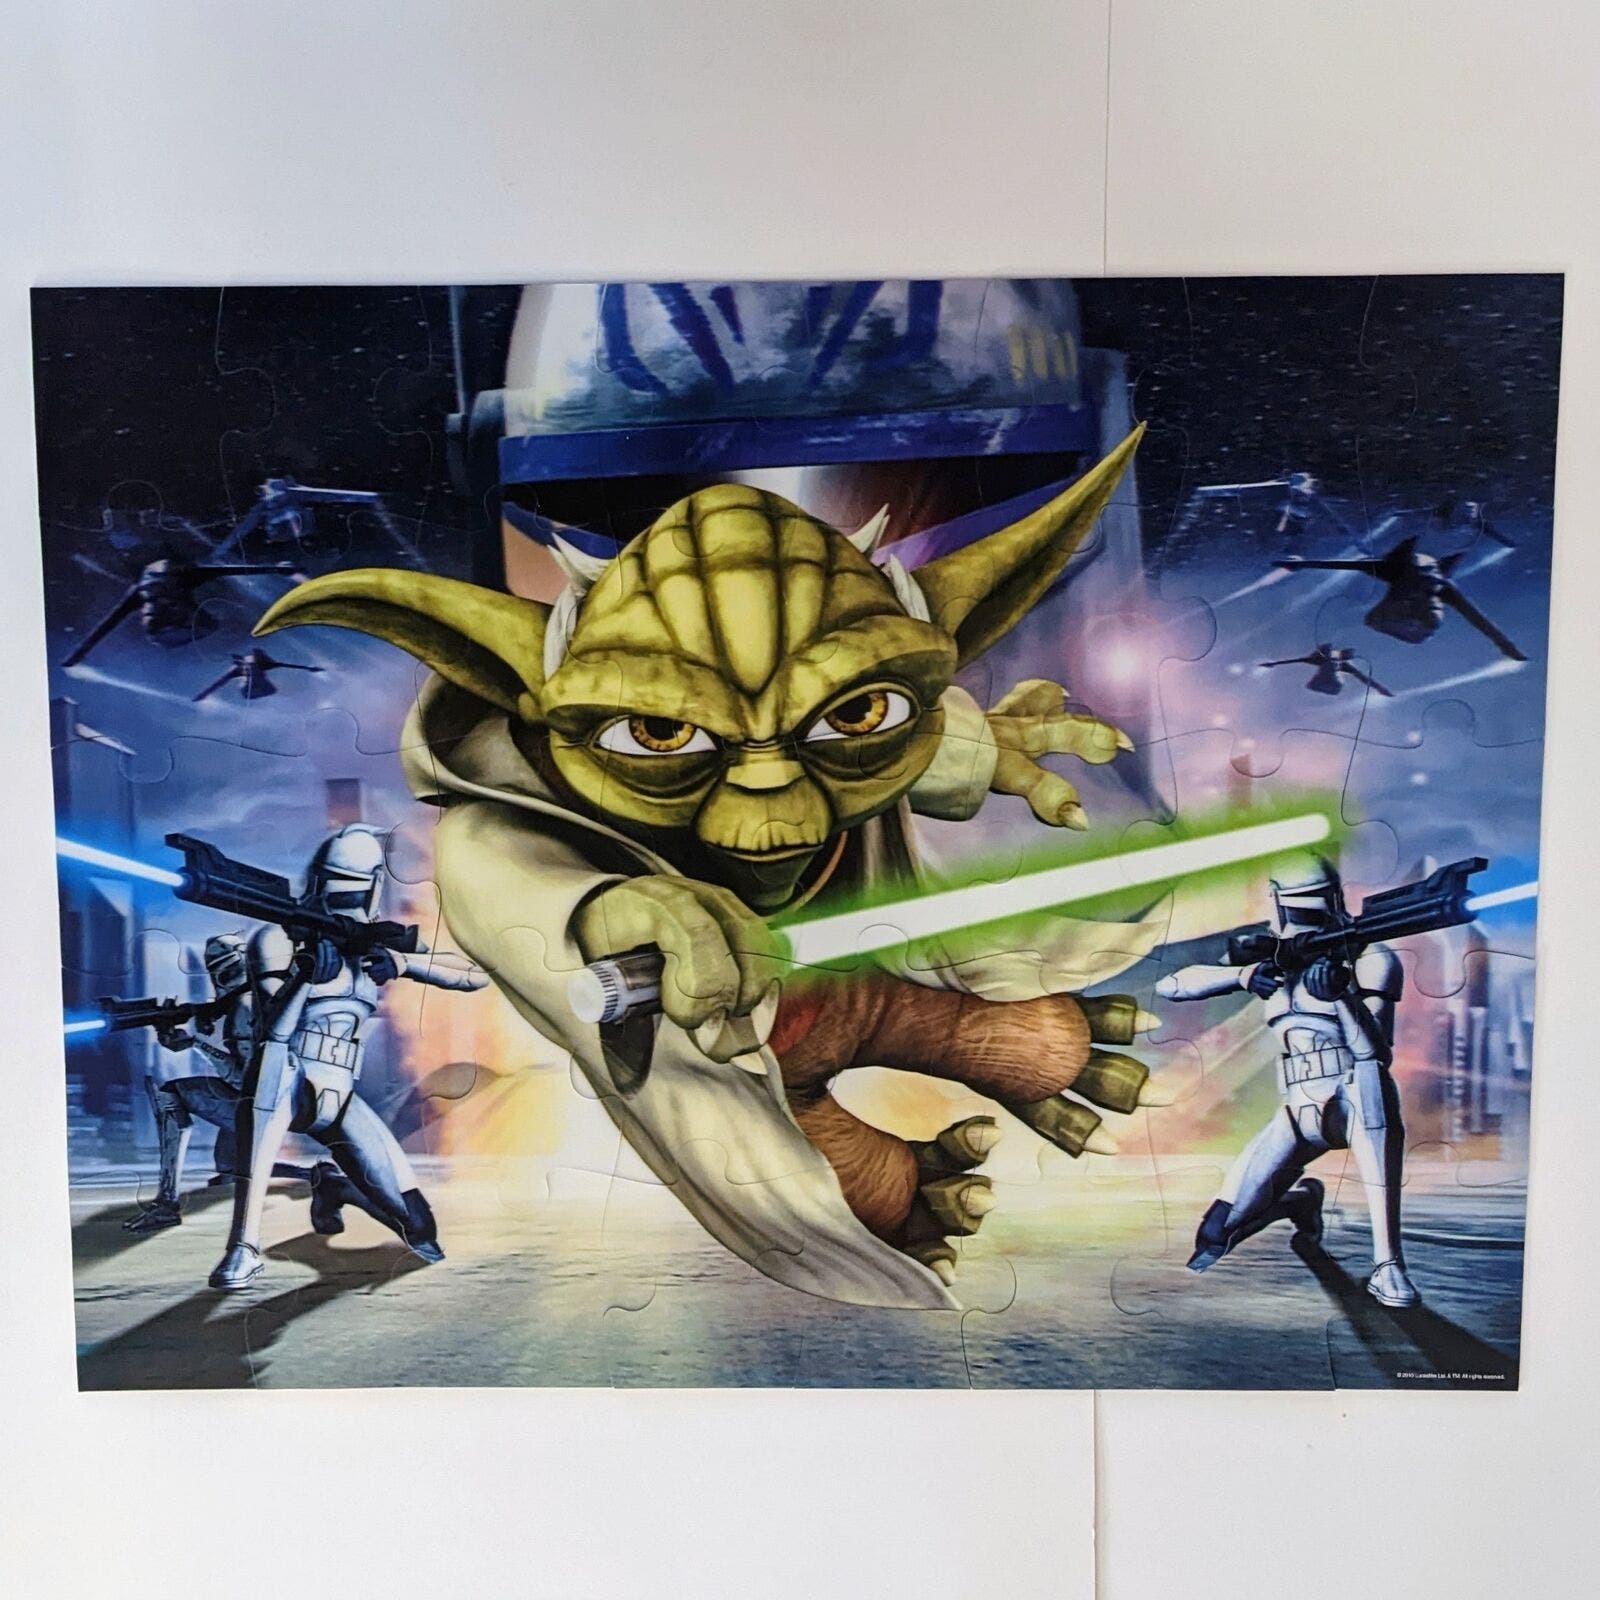 Star Wars Clone Wars 40 Pc Lenticular Puzzle 24x18" - Used (Cardinal, 2010) - $7.91